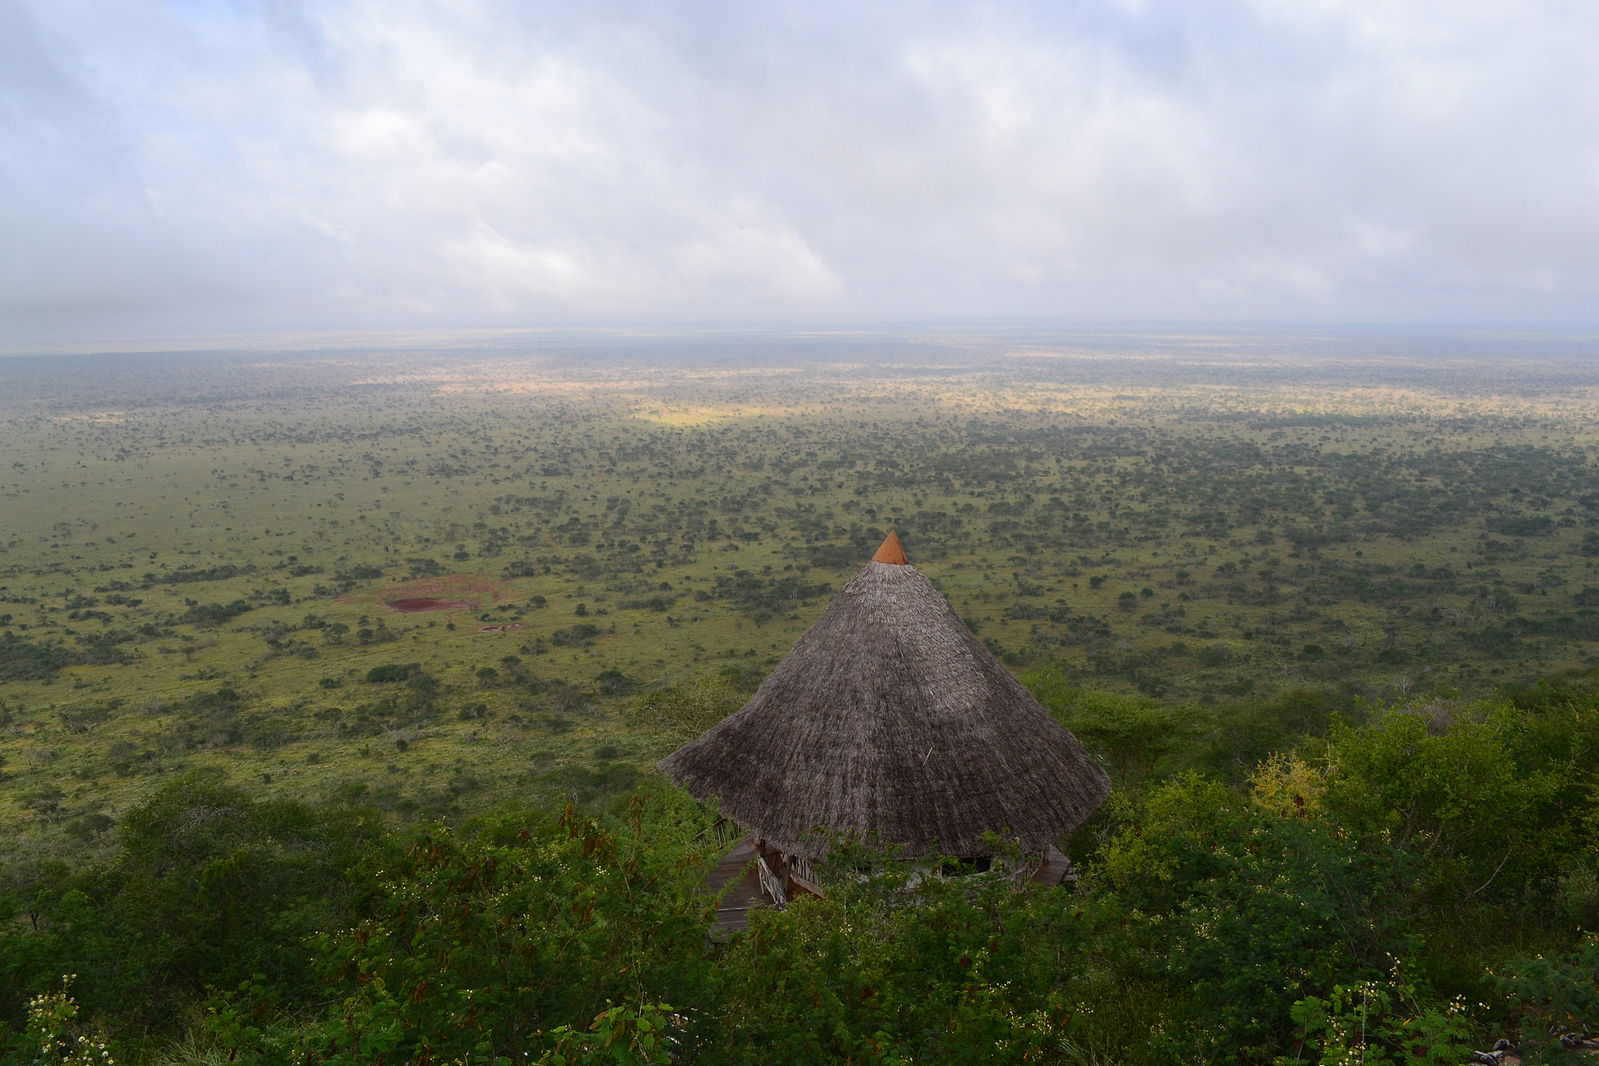 Photograph of African tropical savanna, LUMO Community Wildlife Sanctuary, Kenya. The photo shows grassland with groups of shrubs covering a landscape with slightly varying topography. The thatched, conical roof of a hut can be seen among shrubs in the foreground.